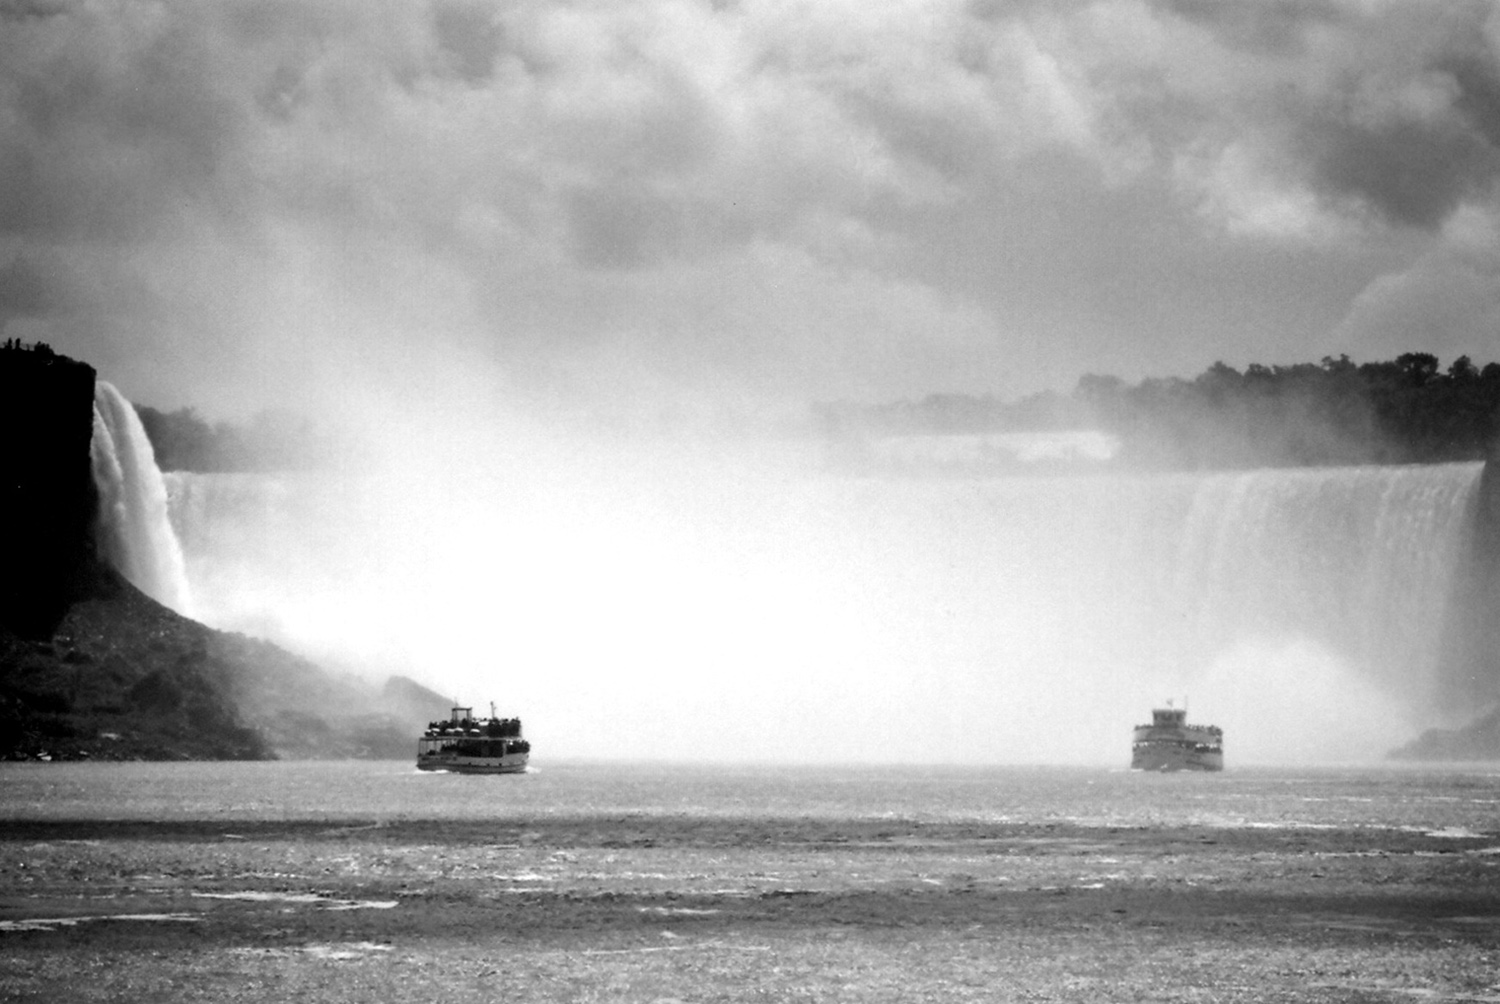 Niagara-Falls_Maid-of-the-Mist_Boats_Tourists_Tourism_Travel_Black-and-White_New-York.jpg